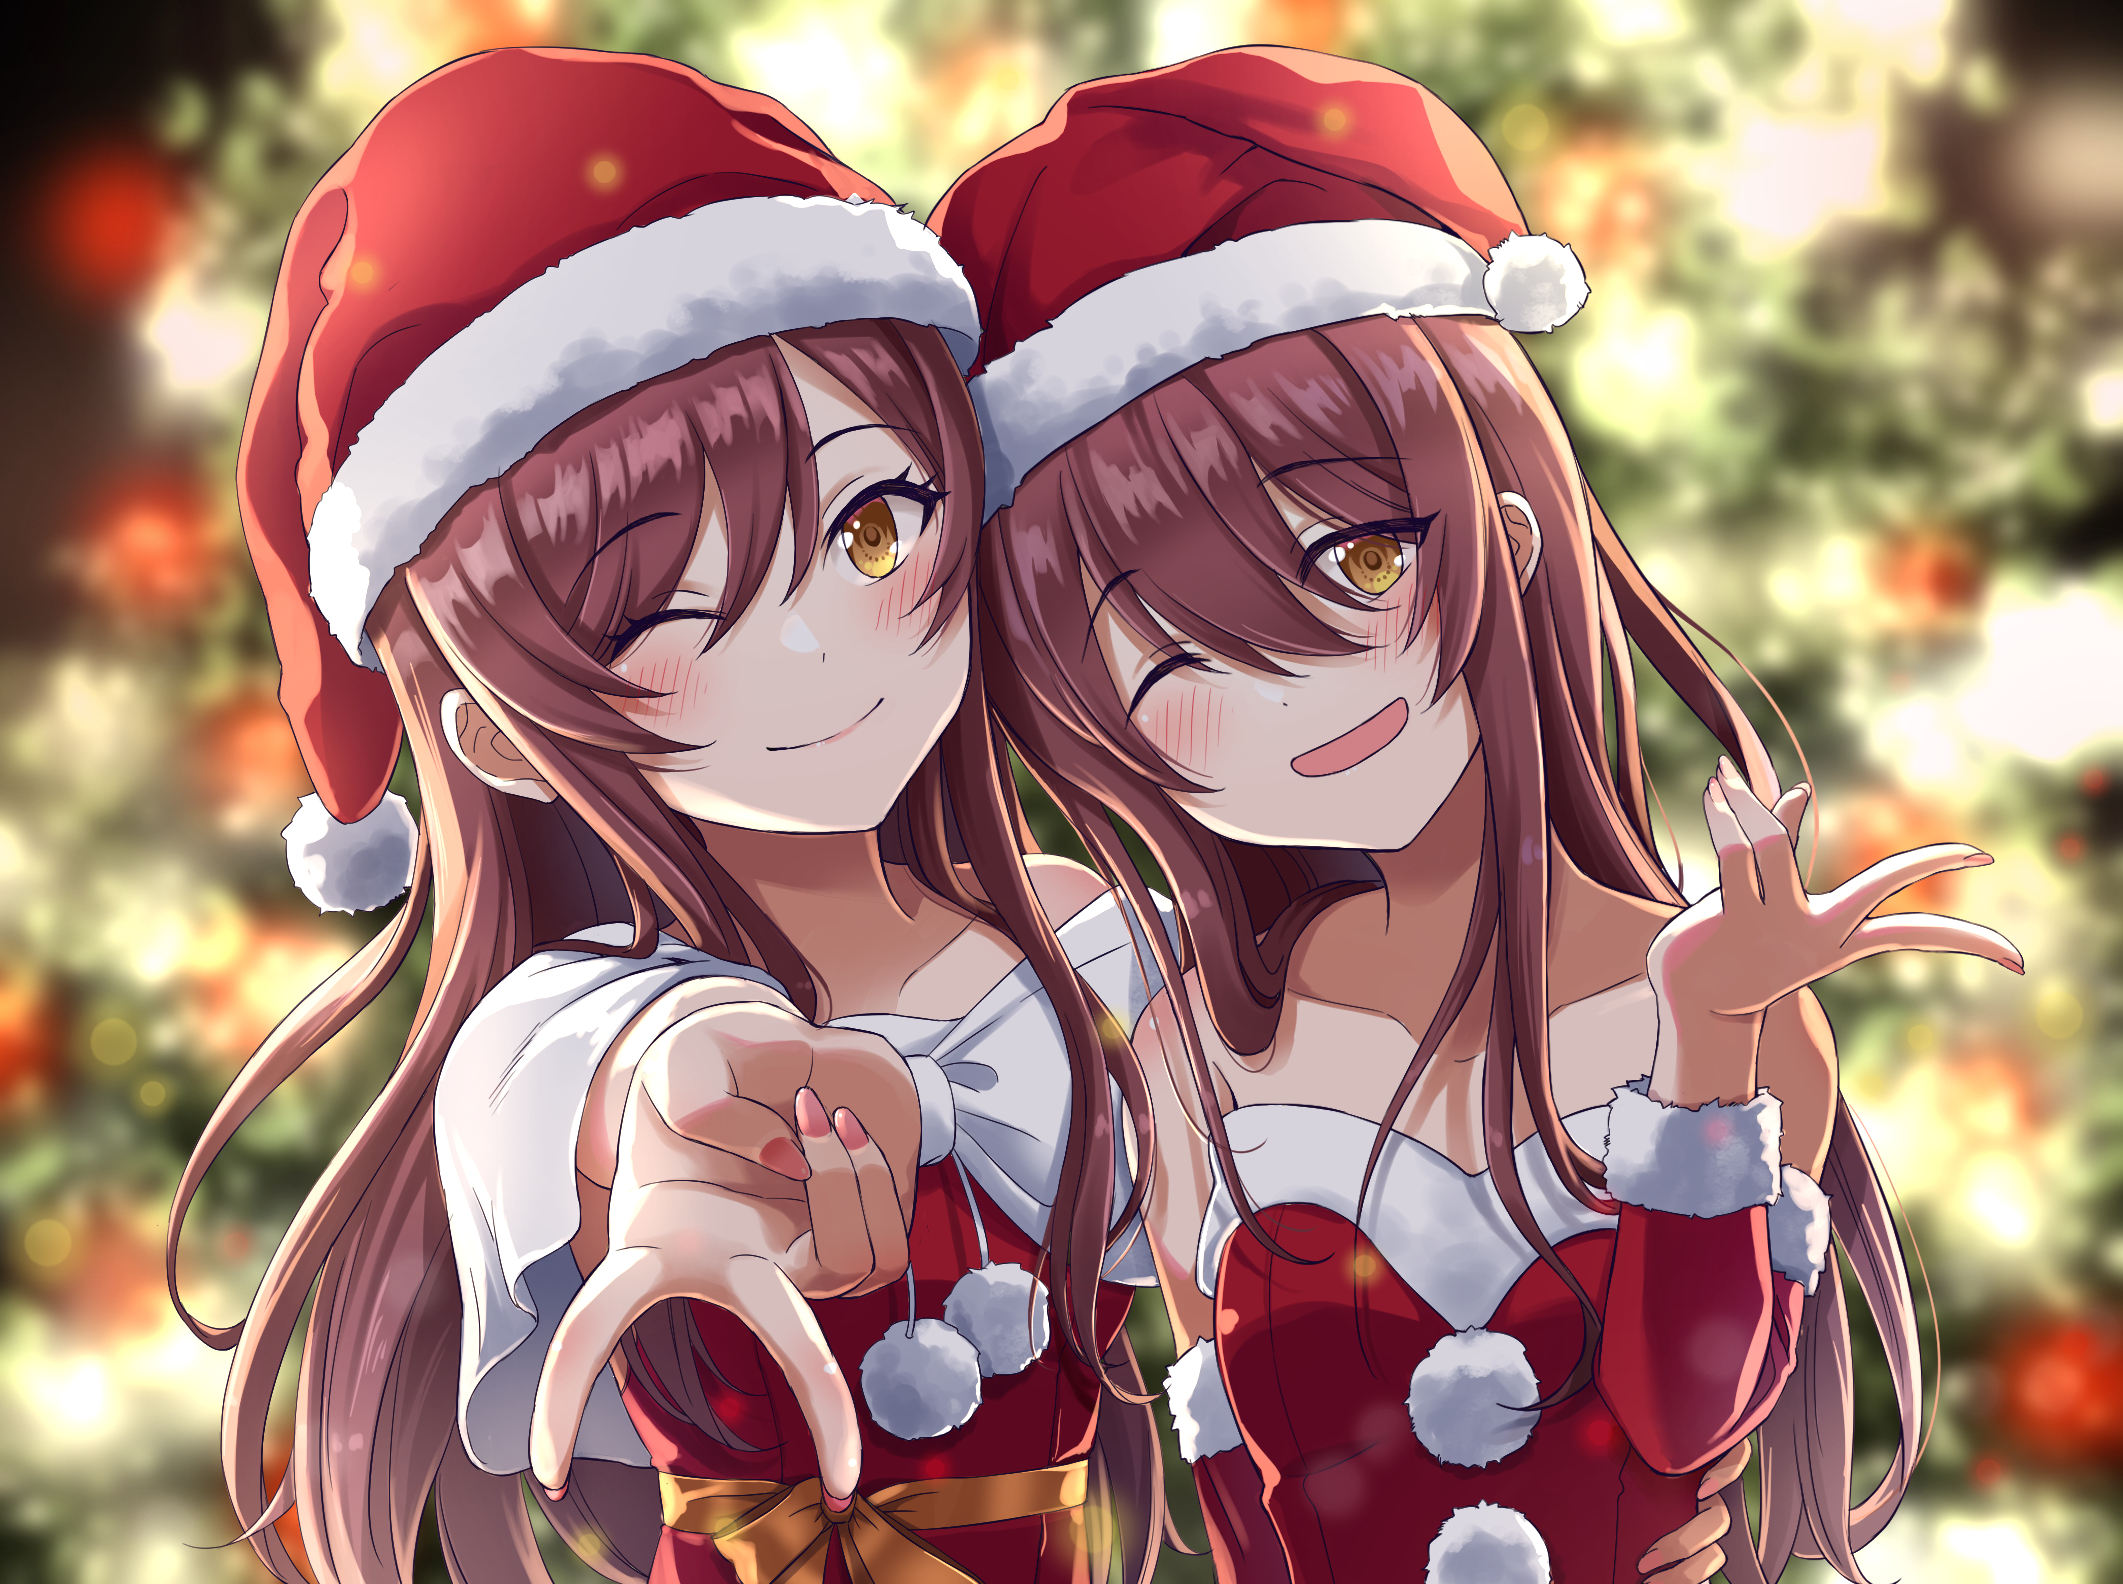 Anime 2123x1584 anime anime girls THE iDOLM@STER THE iDOLM@STER: Shiny Colors Oosaki Amana Oosaki Tenka long hair brunette two women twins artwork digital art fan art blurred blurry background smiling looking at viewer blushing Christmas clothes Christmas tree Christmas lights